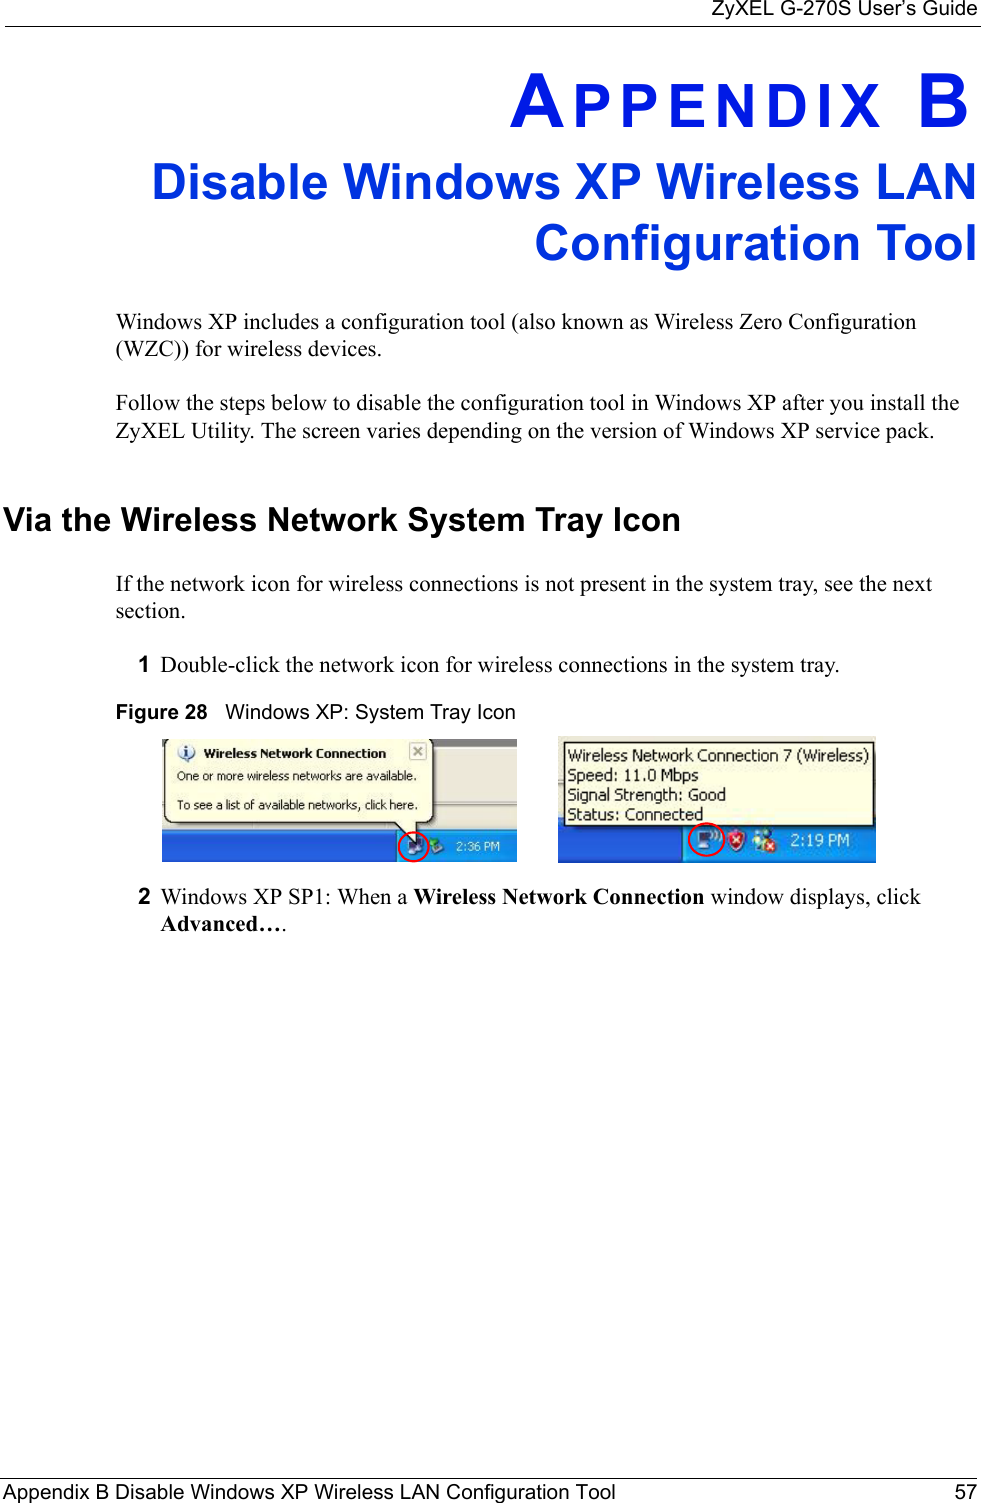 ZyXEL G-270S User’s GuideAppendix B Disable Windows XP Wireless LAN Configuration Tool 57APPENDIX BDisable Windows XP Wireless LANConfiguration ToolWindows XP includes a configuration tool (also known as Wireless Zero Configuration (WZC)) for wireless devices. Follow the steps below to disable the configuration tool in Windows XP after you install the ZyXEL Utility. The screen varies depending on the version of Windows XP service pack.Via the Wireless Network System Tray IconIf the network icon for wireless connections is not present in the system tray, see the next section.1Double-click the network icon for wireless connections in the system tray. Figure 28   Windows XP: System Tray Icon2Windows XP SP1: When a Wireless Network Connection window displays, click Advanced…. 